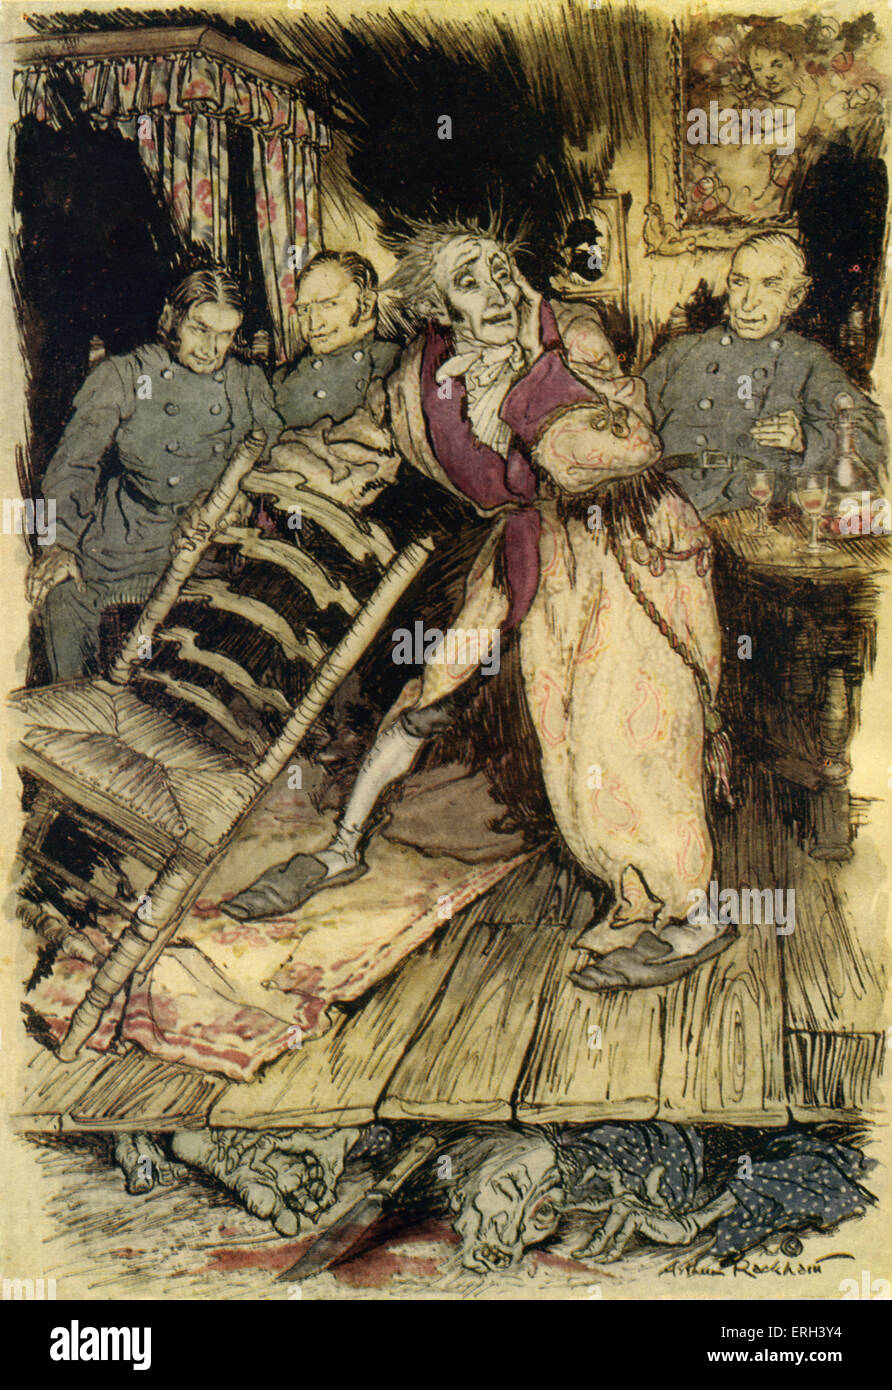 The Tell-Tale Heart' by Edgar Allan Poe. Police are investigating the disappearance of a missing man, whose blood-stained body is shown hidden under the floorboards. The narrator, while explaining about the disappearance of his lodger believes he can hear the beating of the dead man's heart. Caption: 'I swung the chair upon which I had been sitting, and grated it upon the boards!' (to cover the sound of the heart beating). Illustration by Arthur Rackham (1867 - 1939). EAP American author & poet: 19 January 1809 - 7 October 1849. Stock Photo